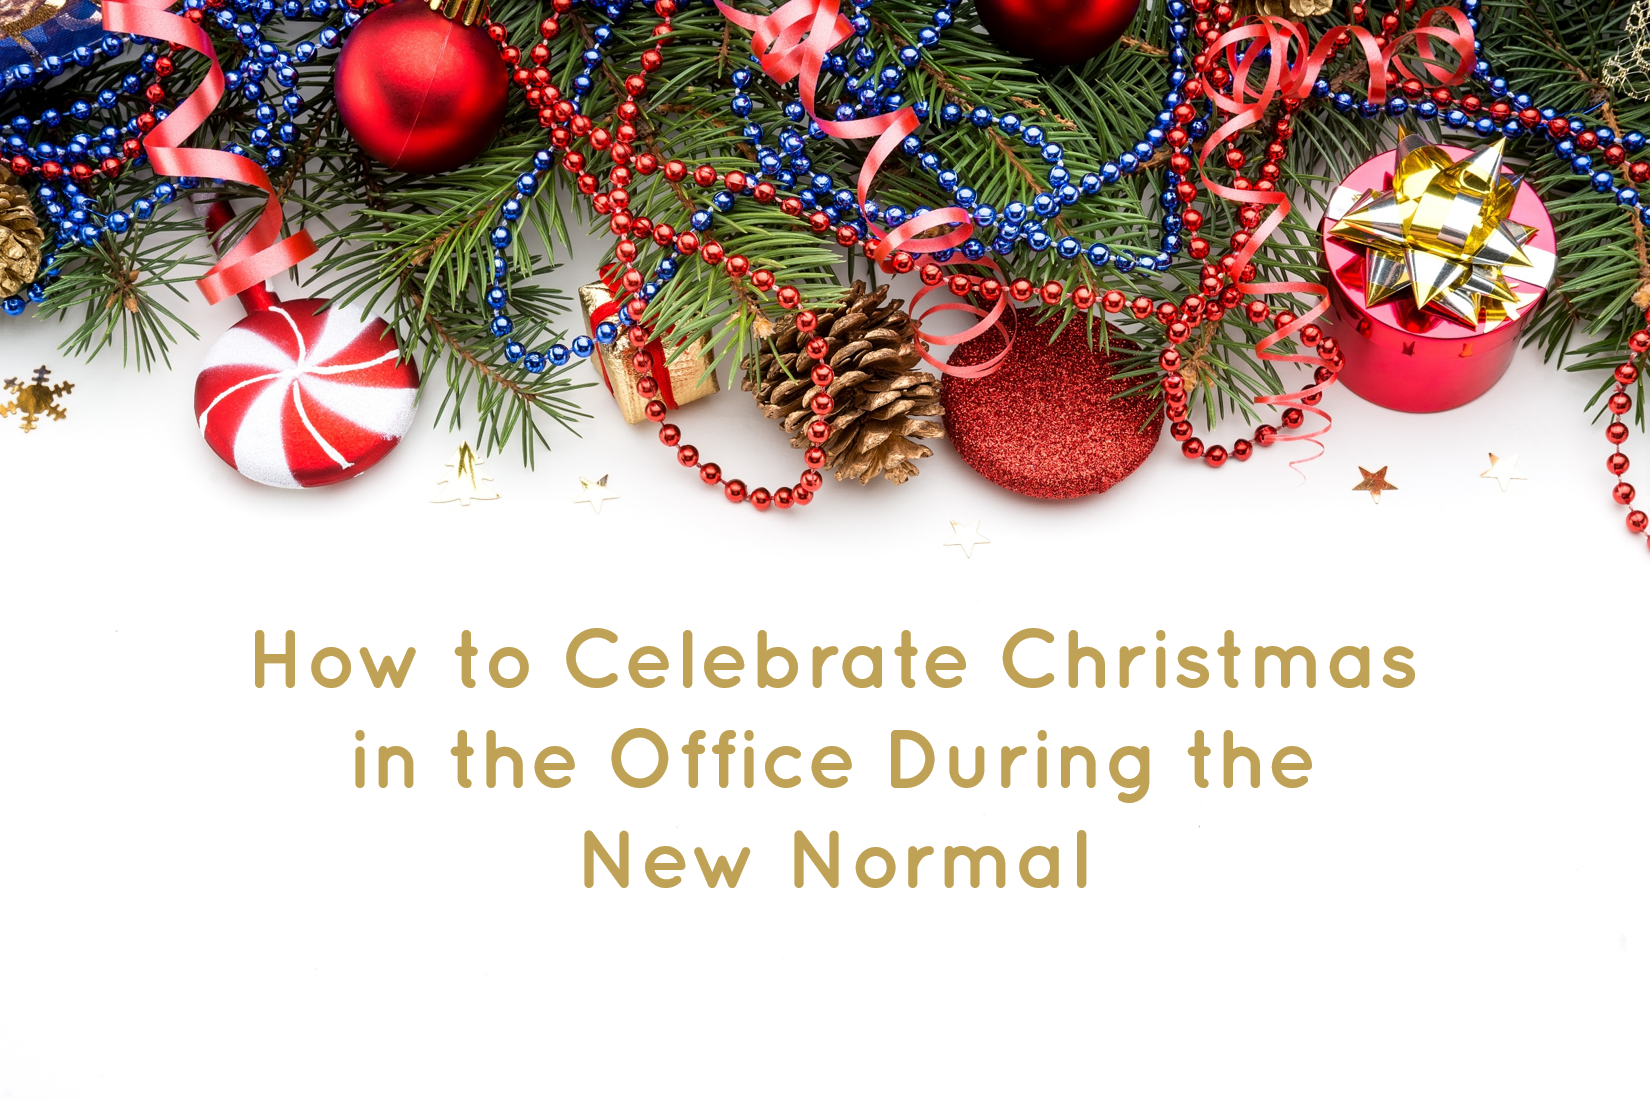 How to Celebrate Christmas in the Office During the New Normal's Image